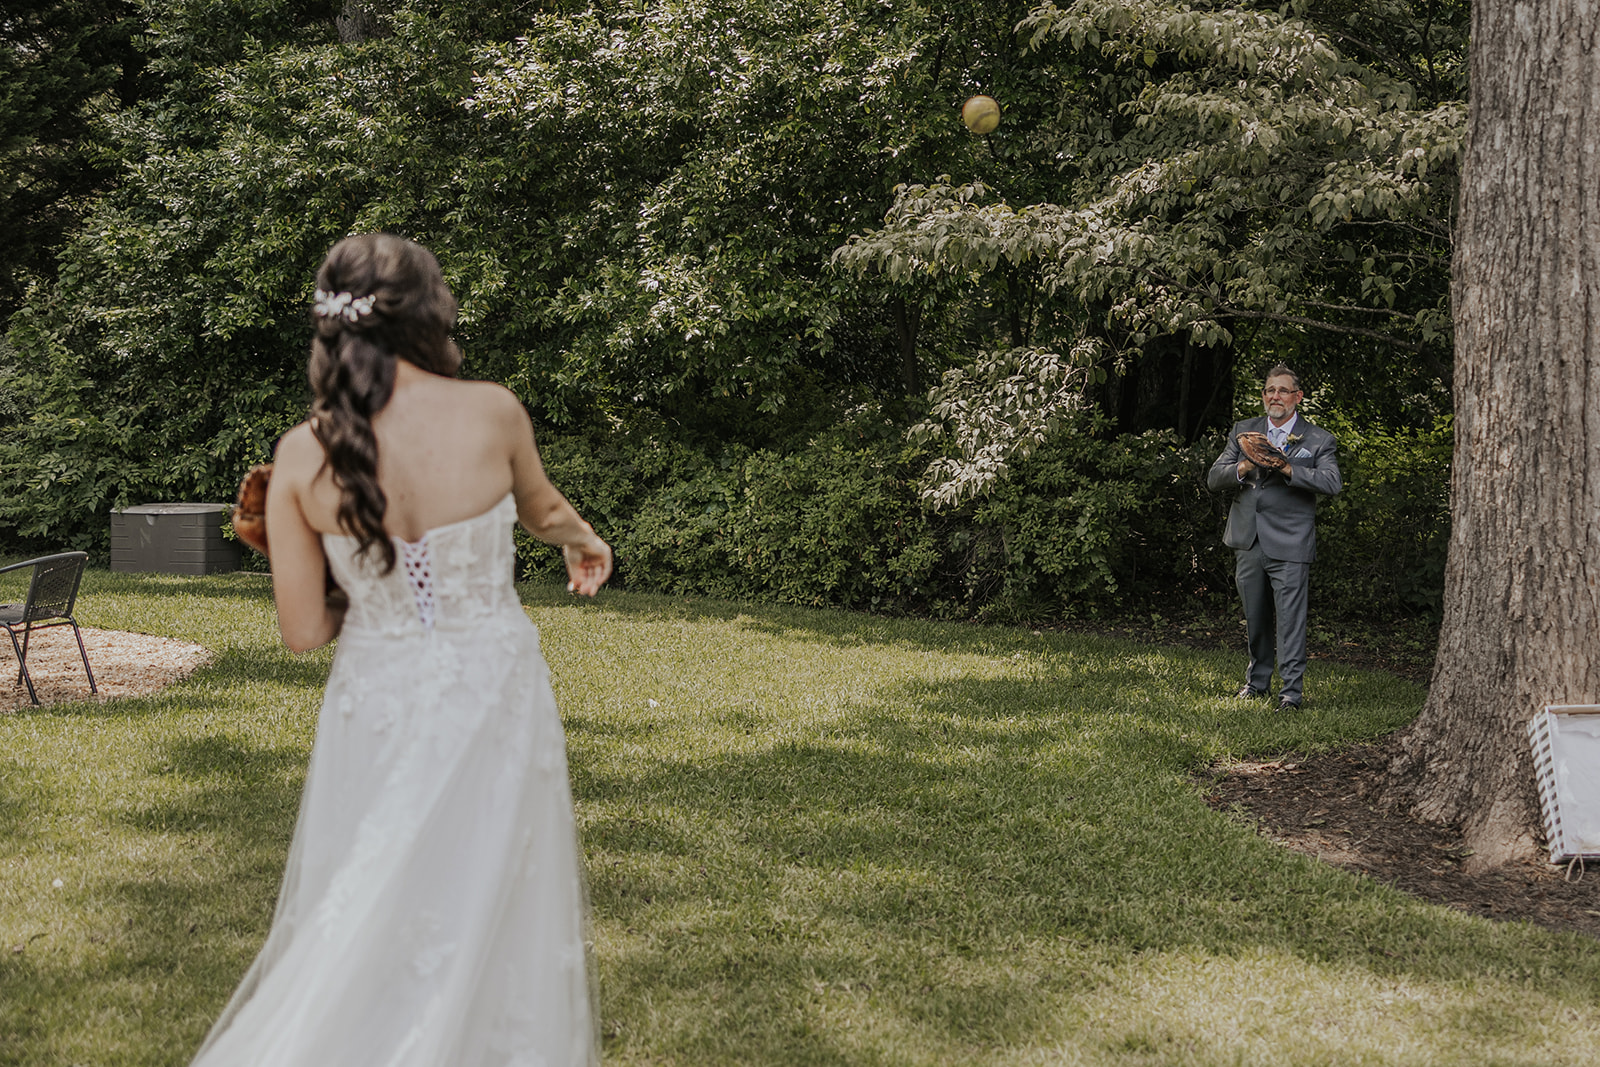 bride plays catch with her dad on her wedding day. Plan your perfect wedding day timeline!